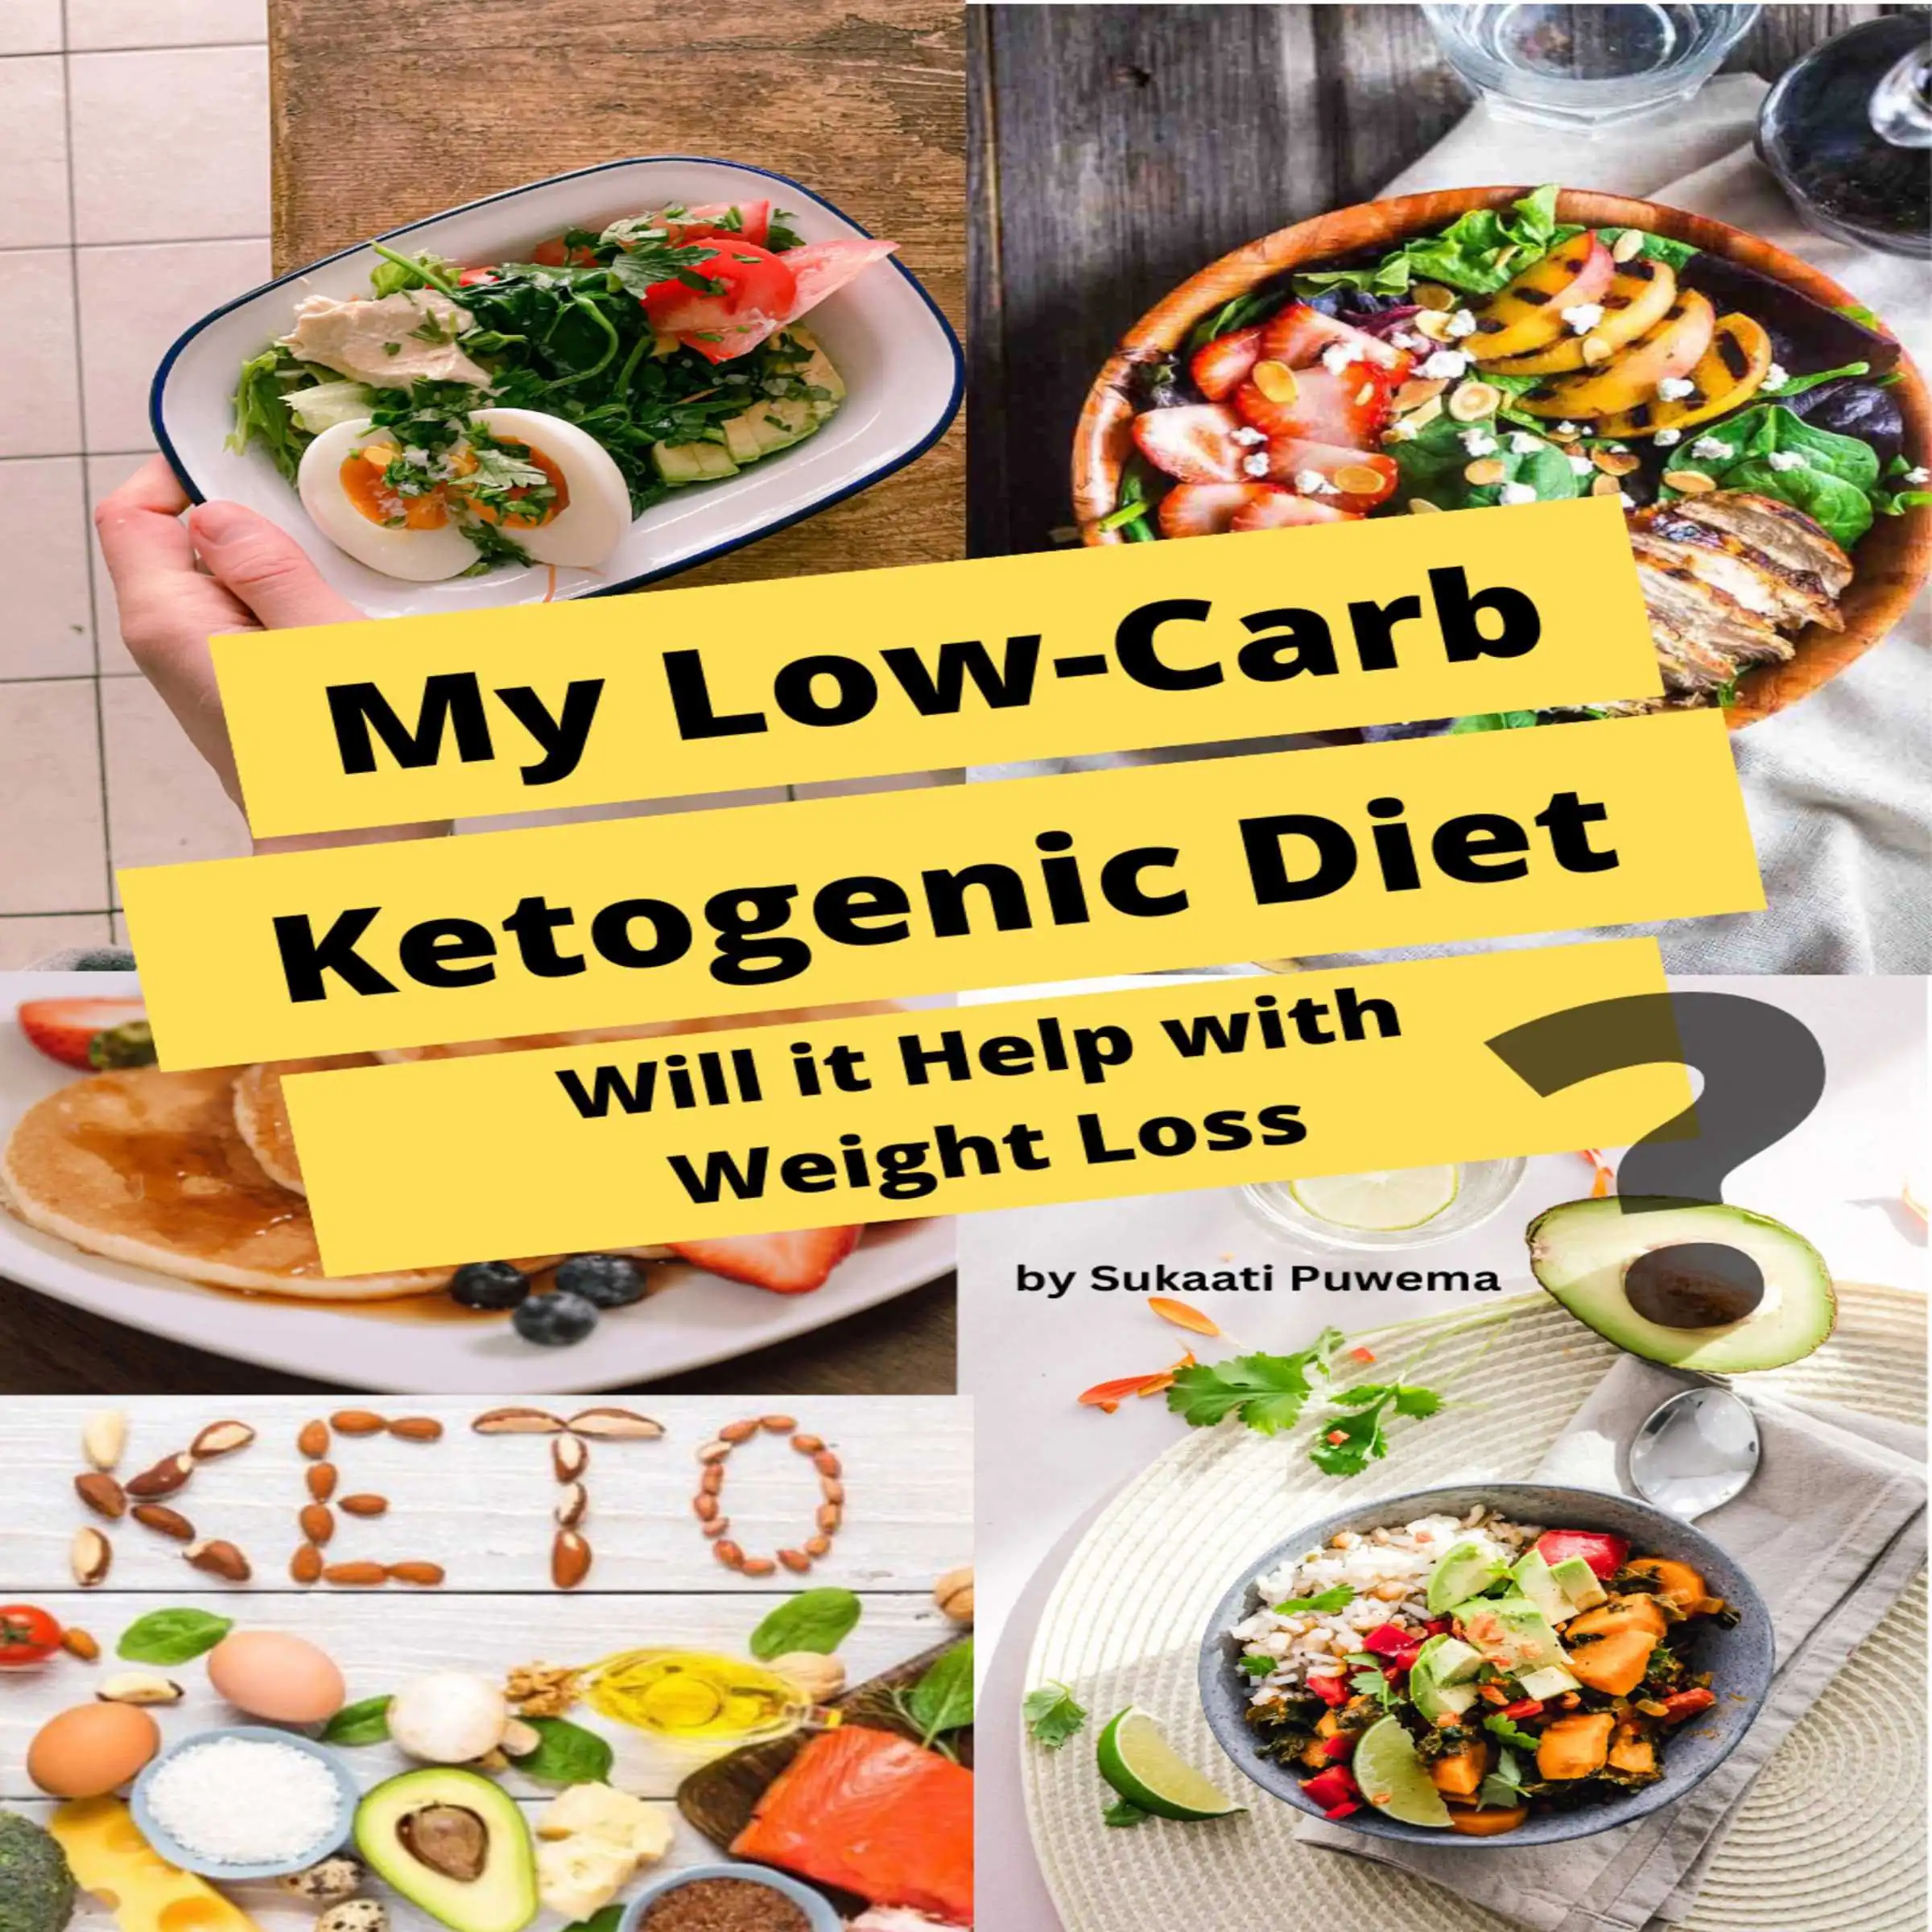 My Low-Carb Ketogenic Diet by Sukaati Puwema Audiobook